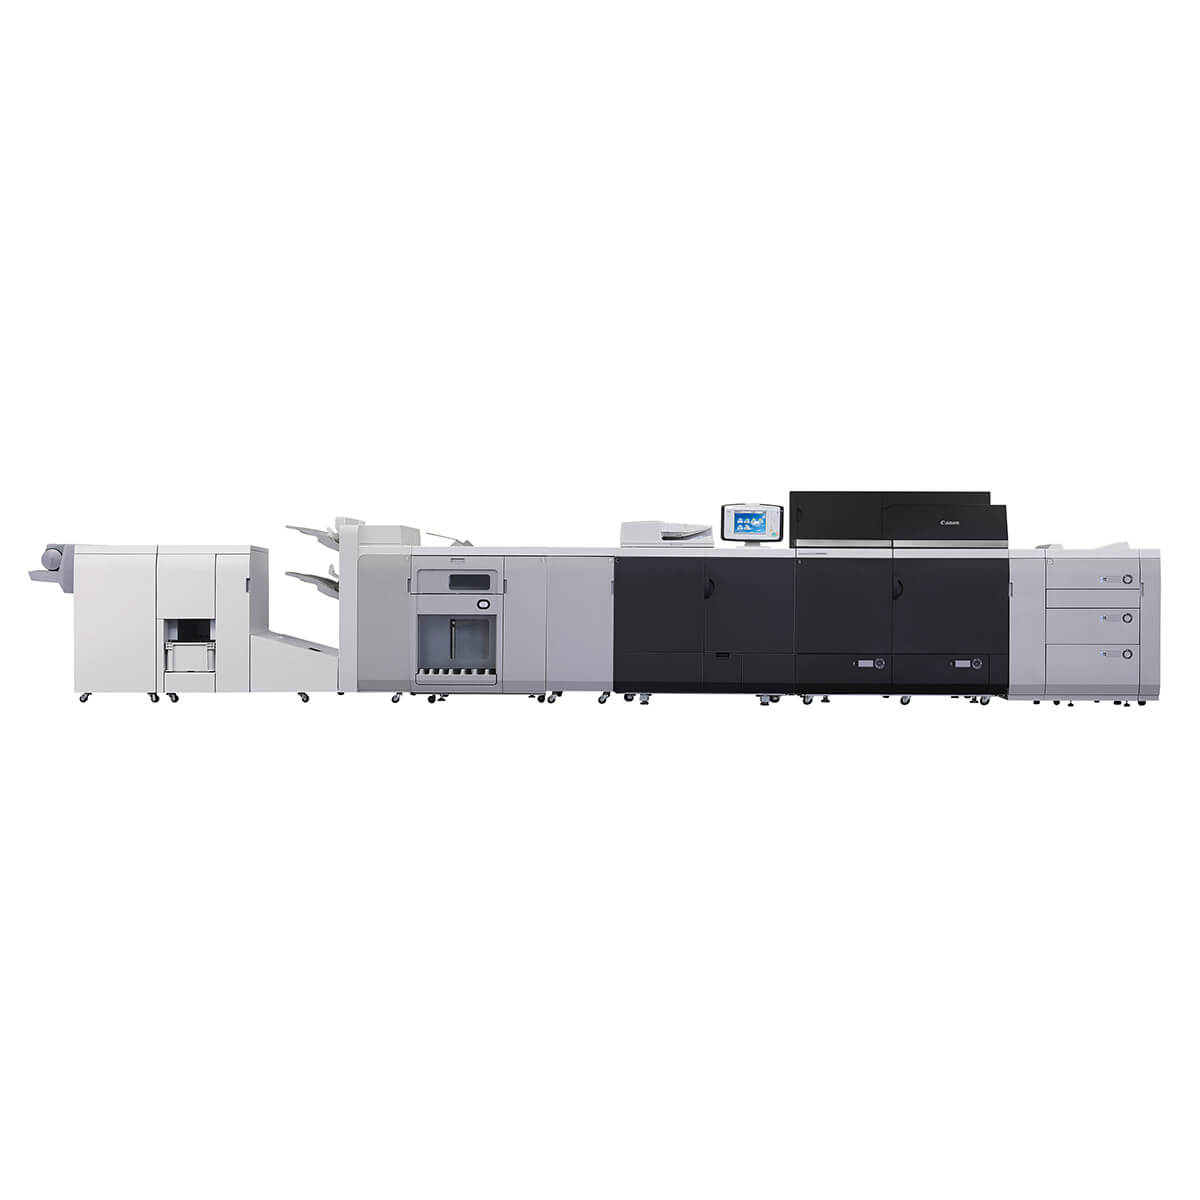 imagePRESS C10010VP is an outstanding colour digital press for fast, versatile and affordable print